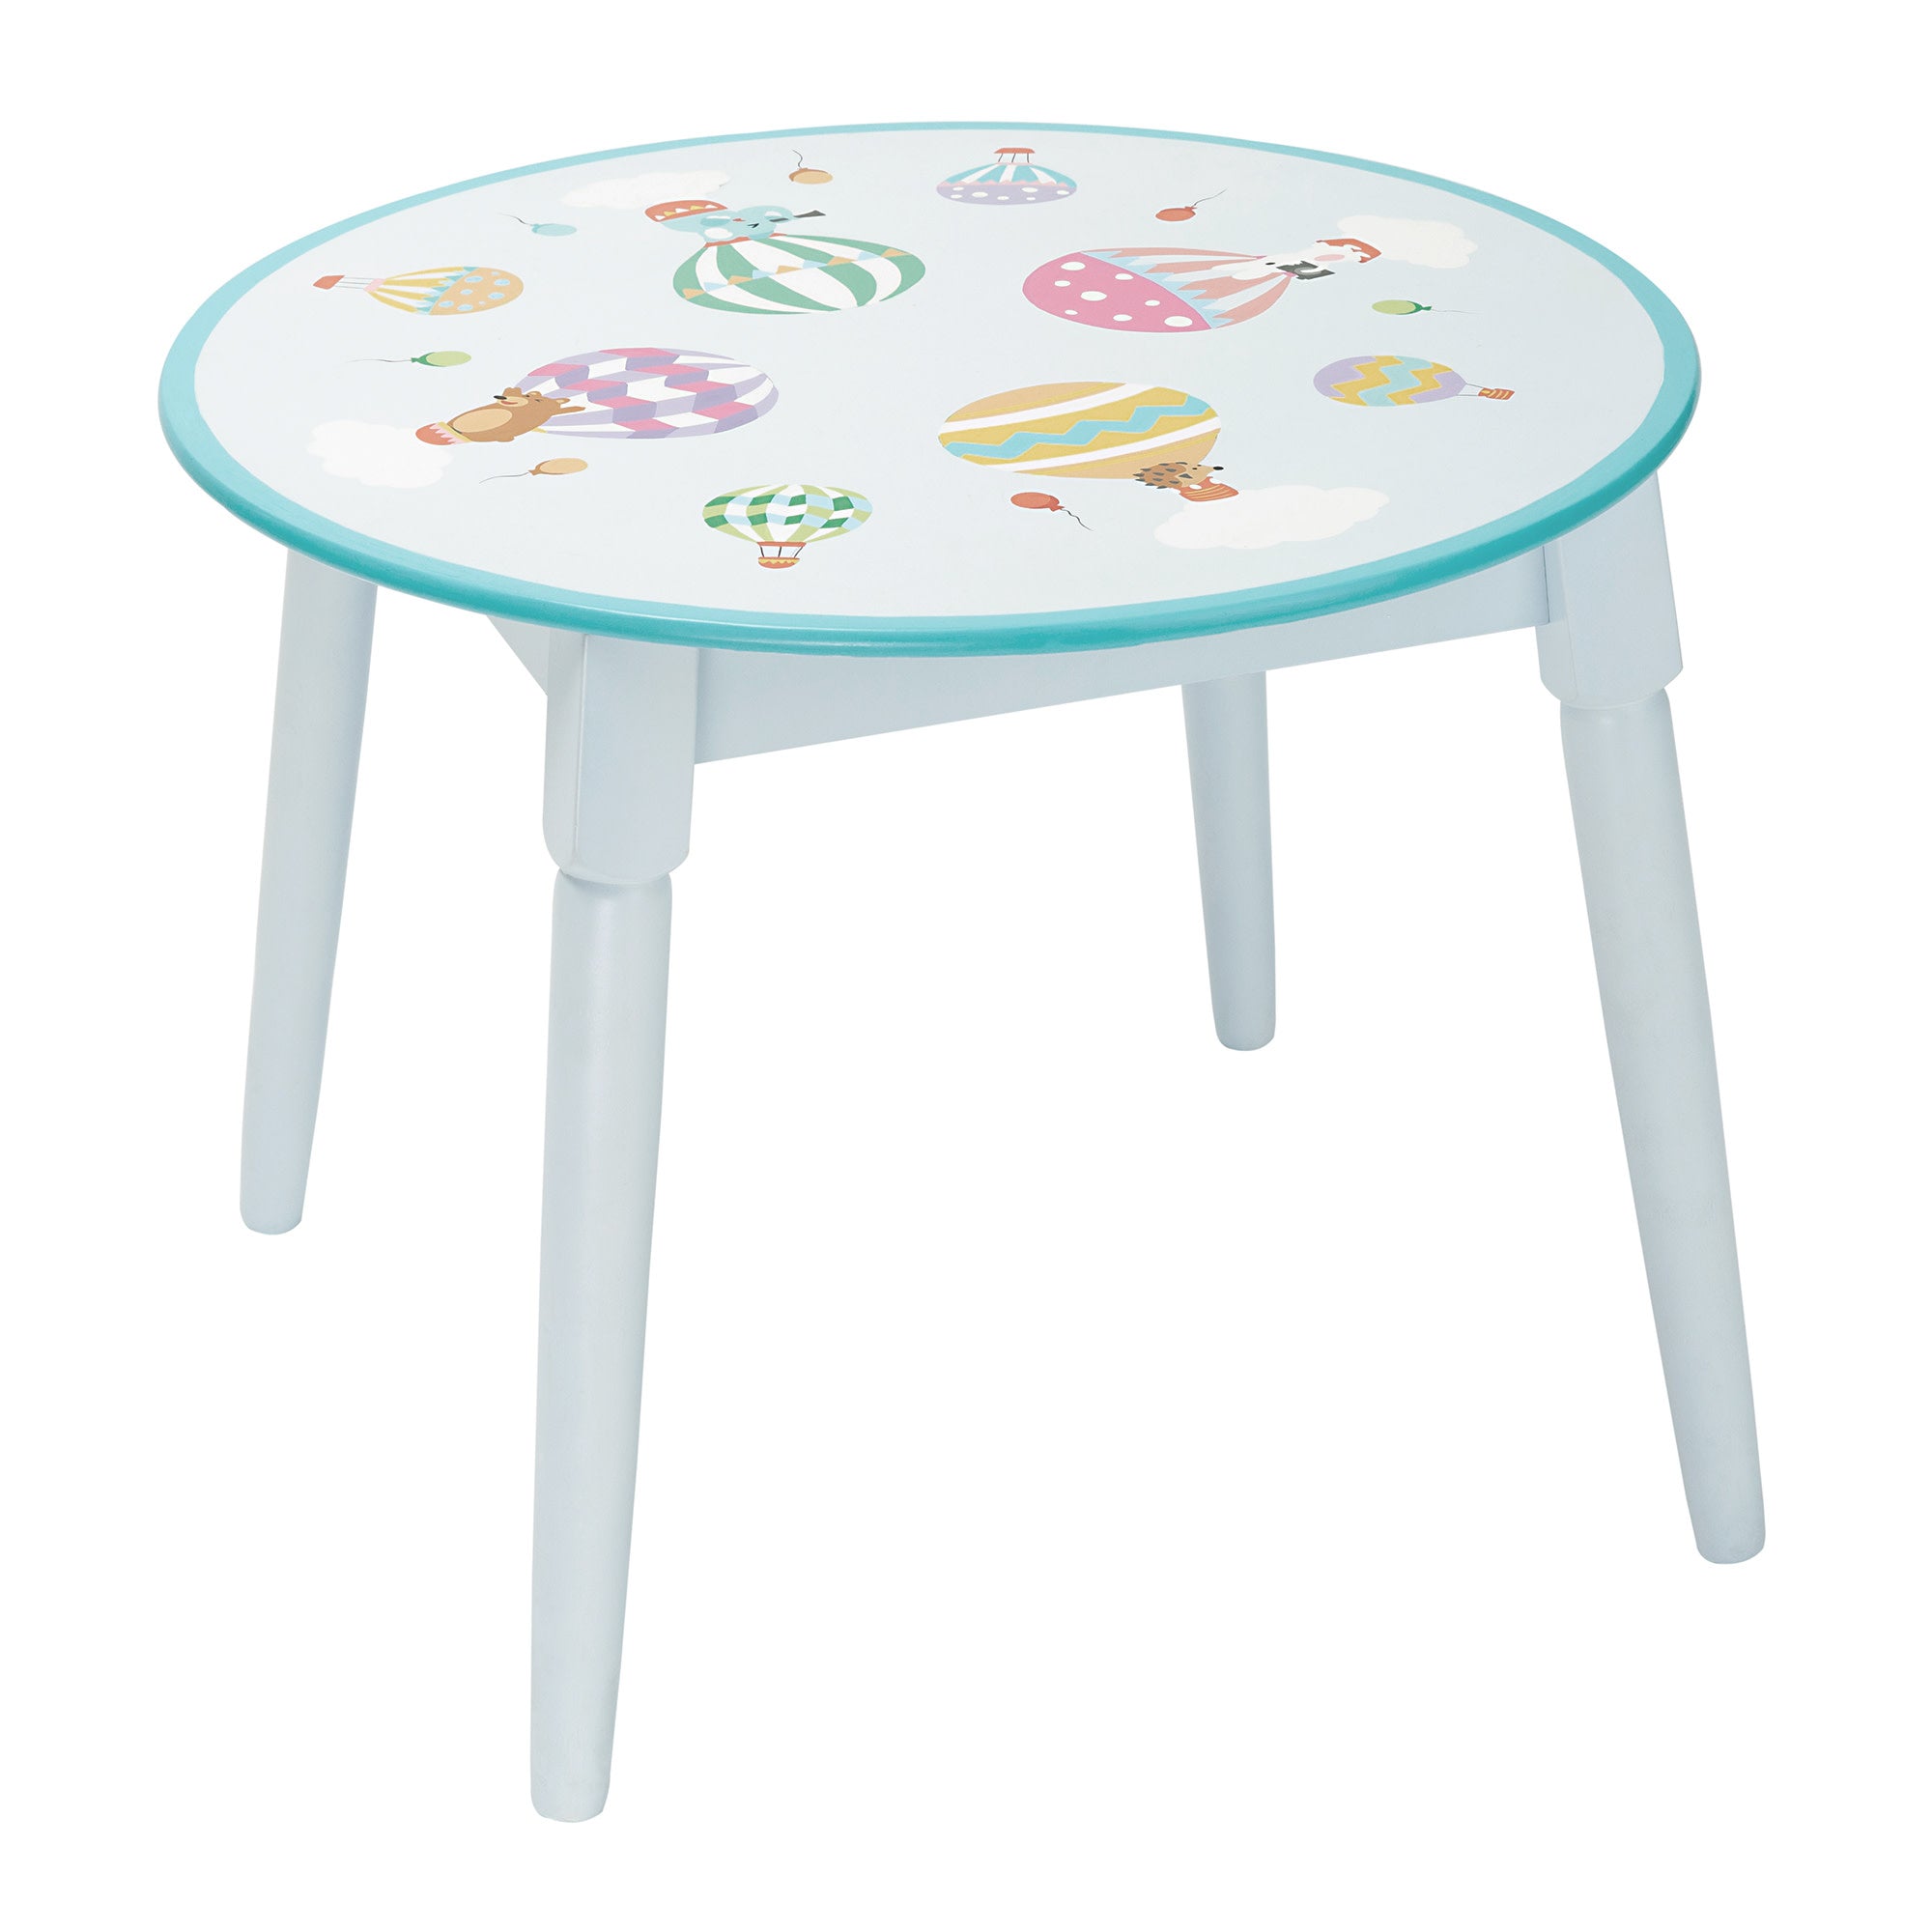 Fantasy Fields Toy Furniture Hand-Painted Hot Air Balloons Round Table, Gray/Blue